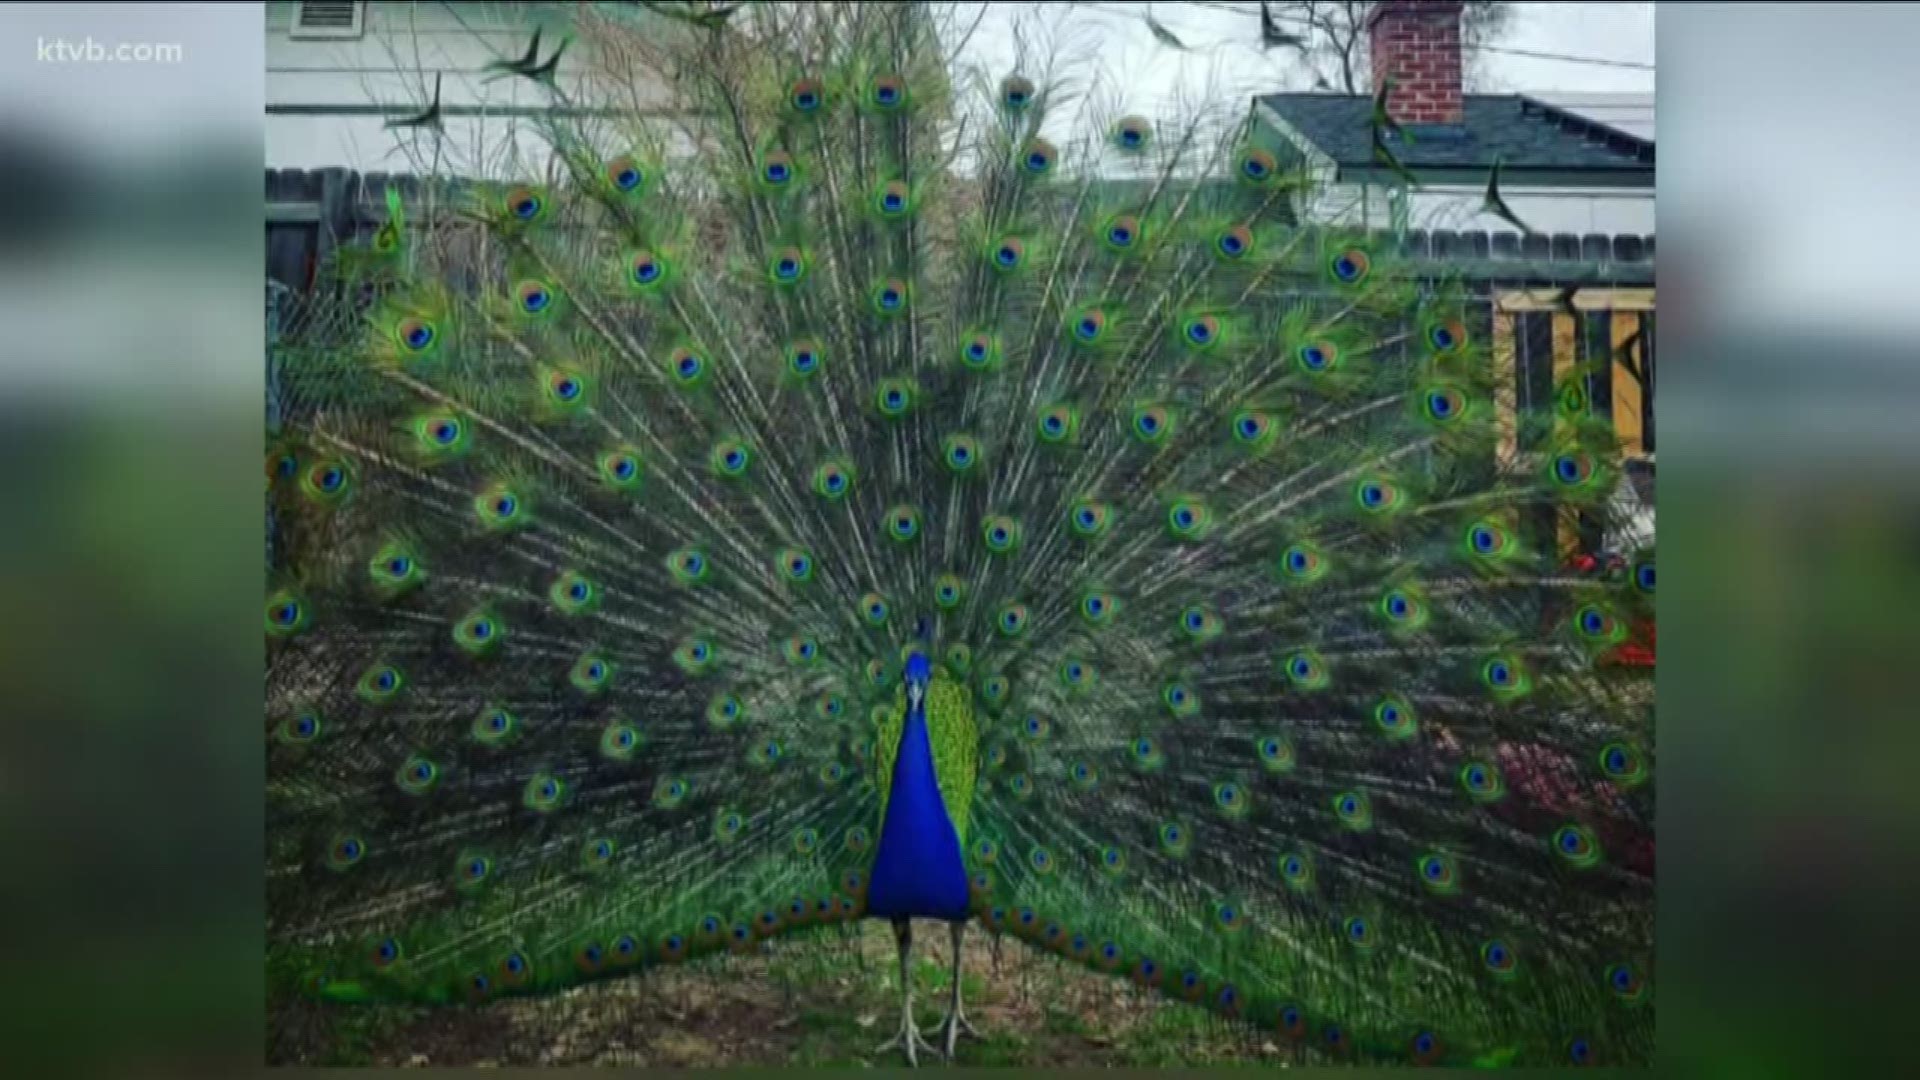 Residents say they've seen several wild peacocks roaming the neighborhood, but where they came from is a mystery.